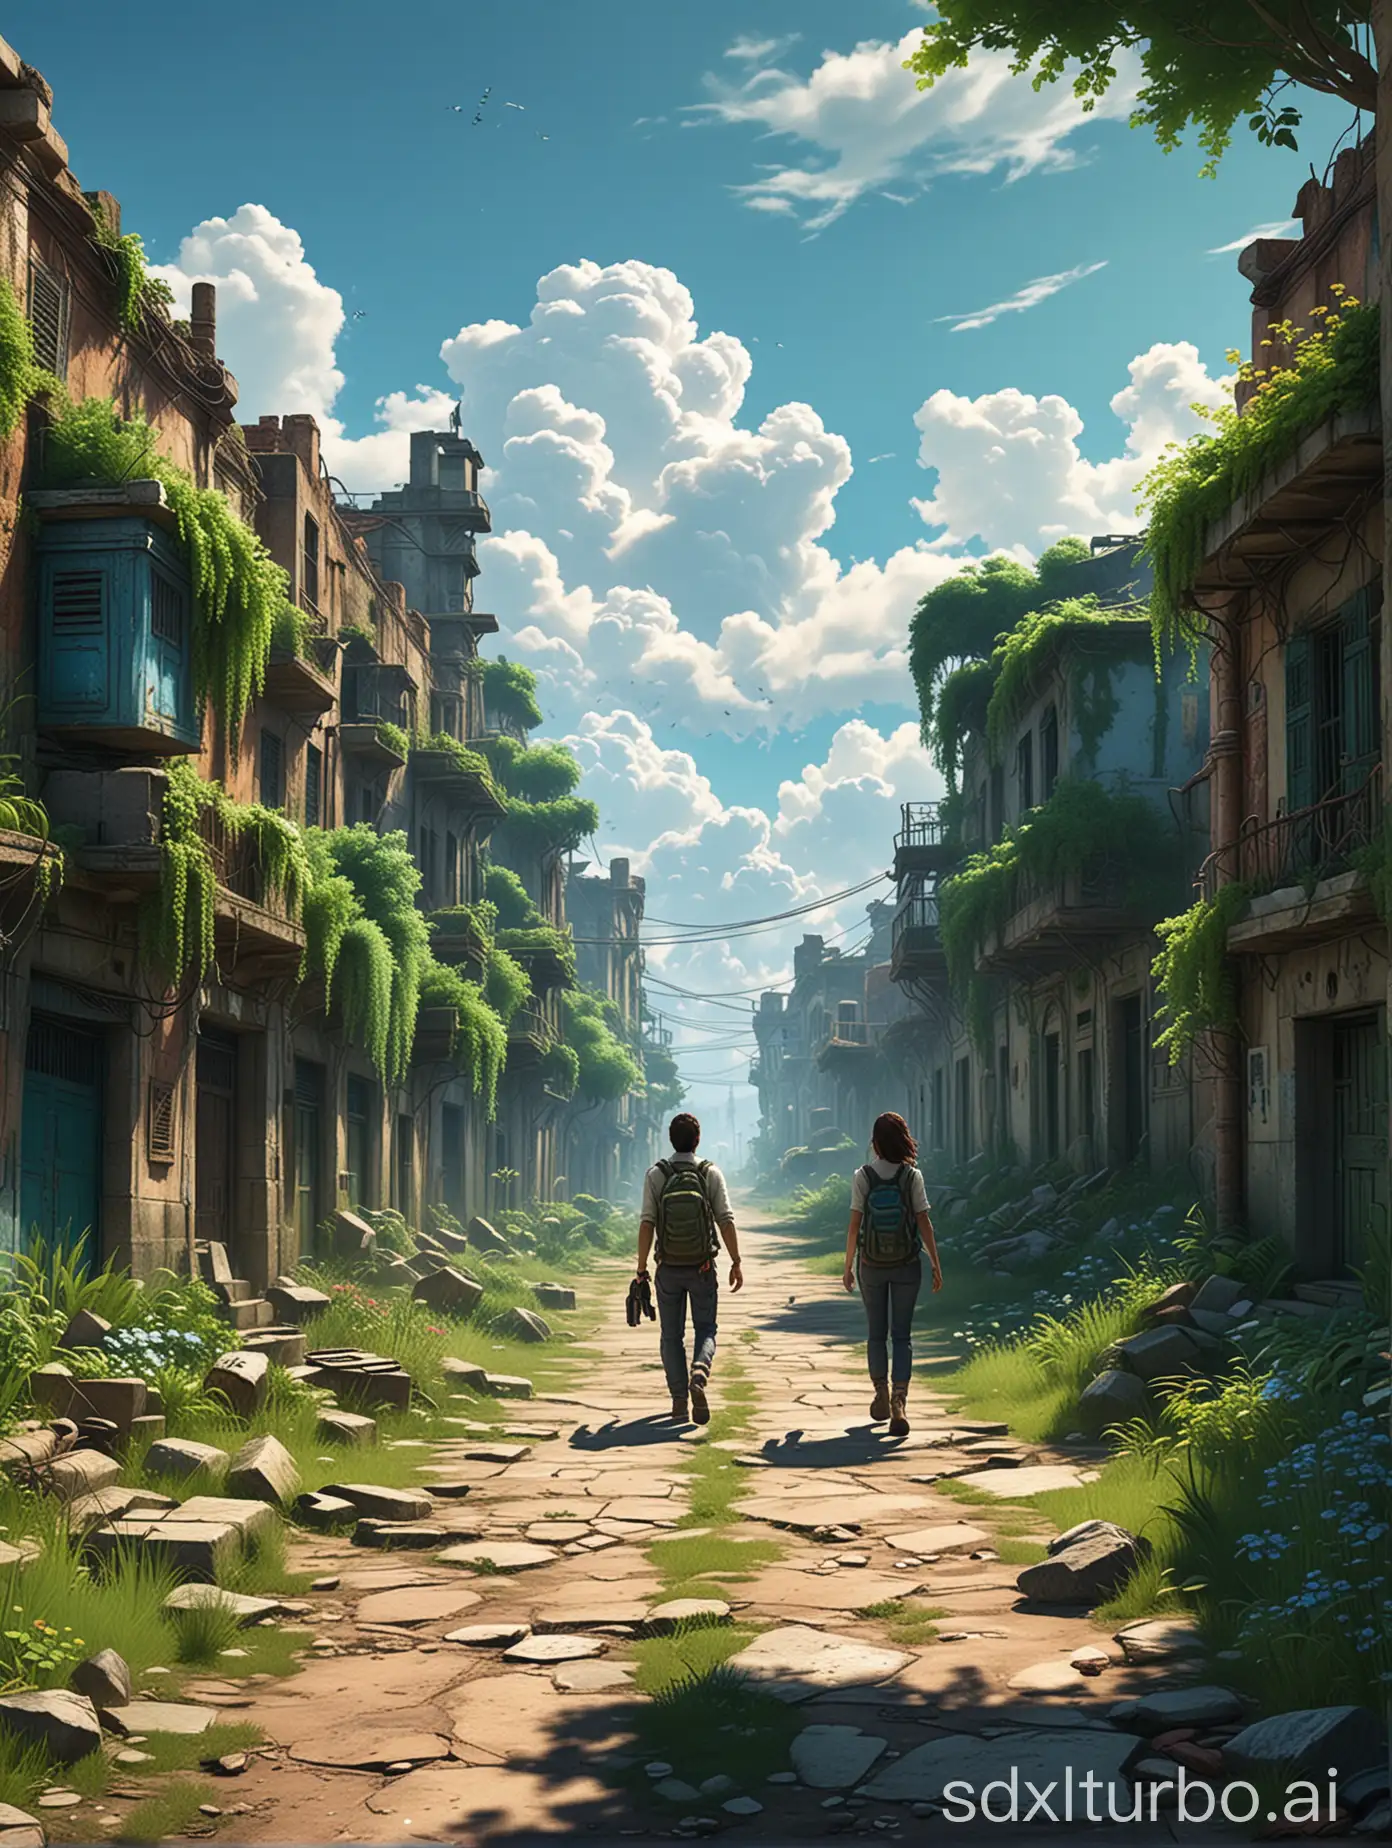 Uncharted game art style of an abandoned city, where lush greenery has taken over. A young man and a woman are leisurely strolling down the street, with their backs to the viewer. The predominant colors of green and blue are evident, as the trees,different kinds color of flowers and grass have reclaimed the city's structures. The sky is a brilliant blue, dotted with fluffy white clouds. This dystopian-meets-nature scene has an eerie yet serene atmosphere, showcasing the resilience of nature in an urban environment.viiviid